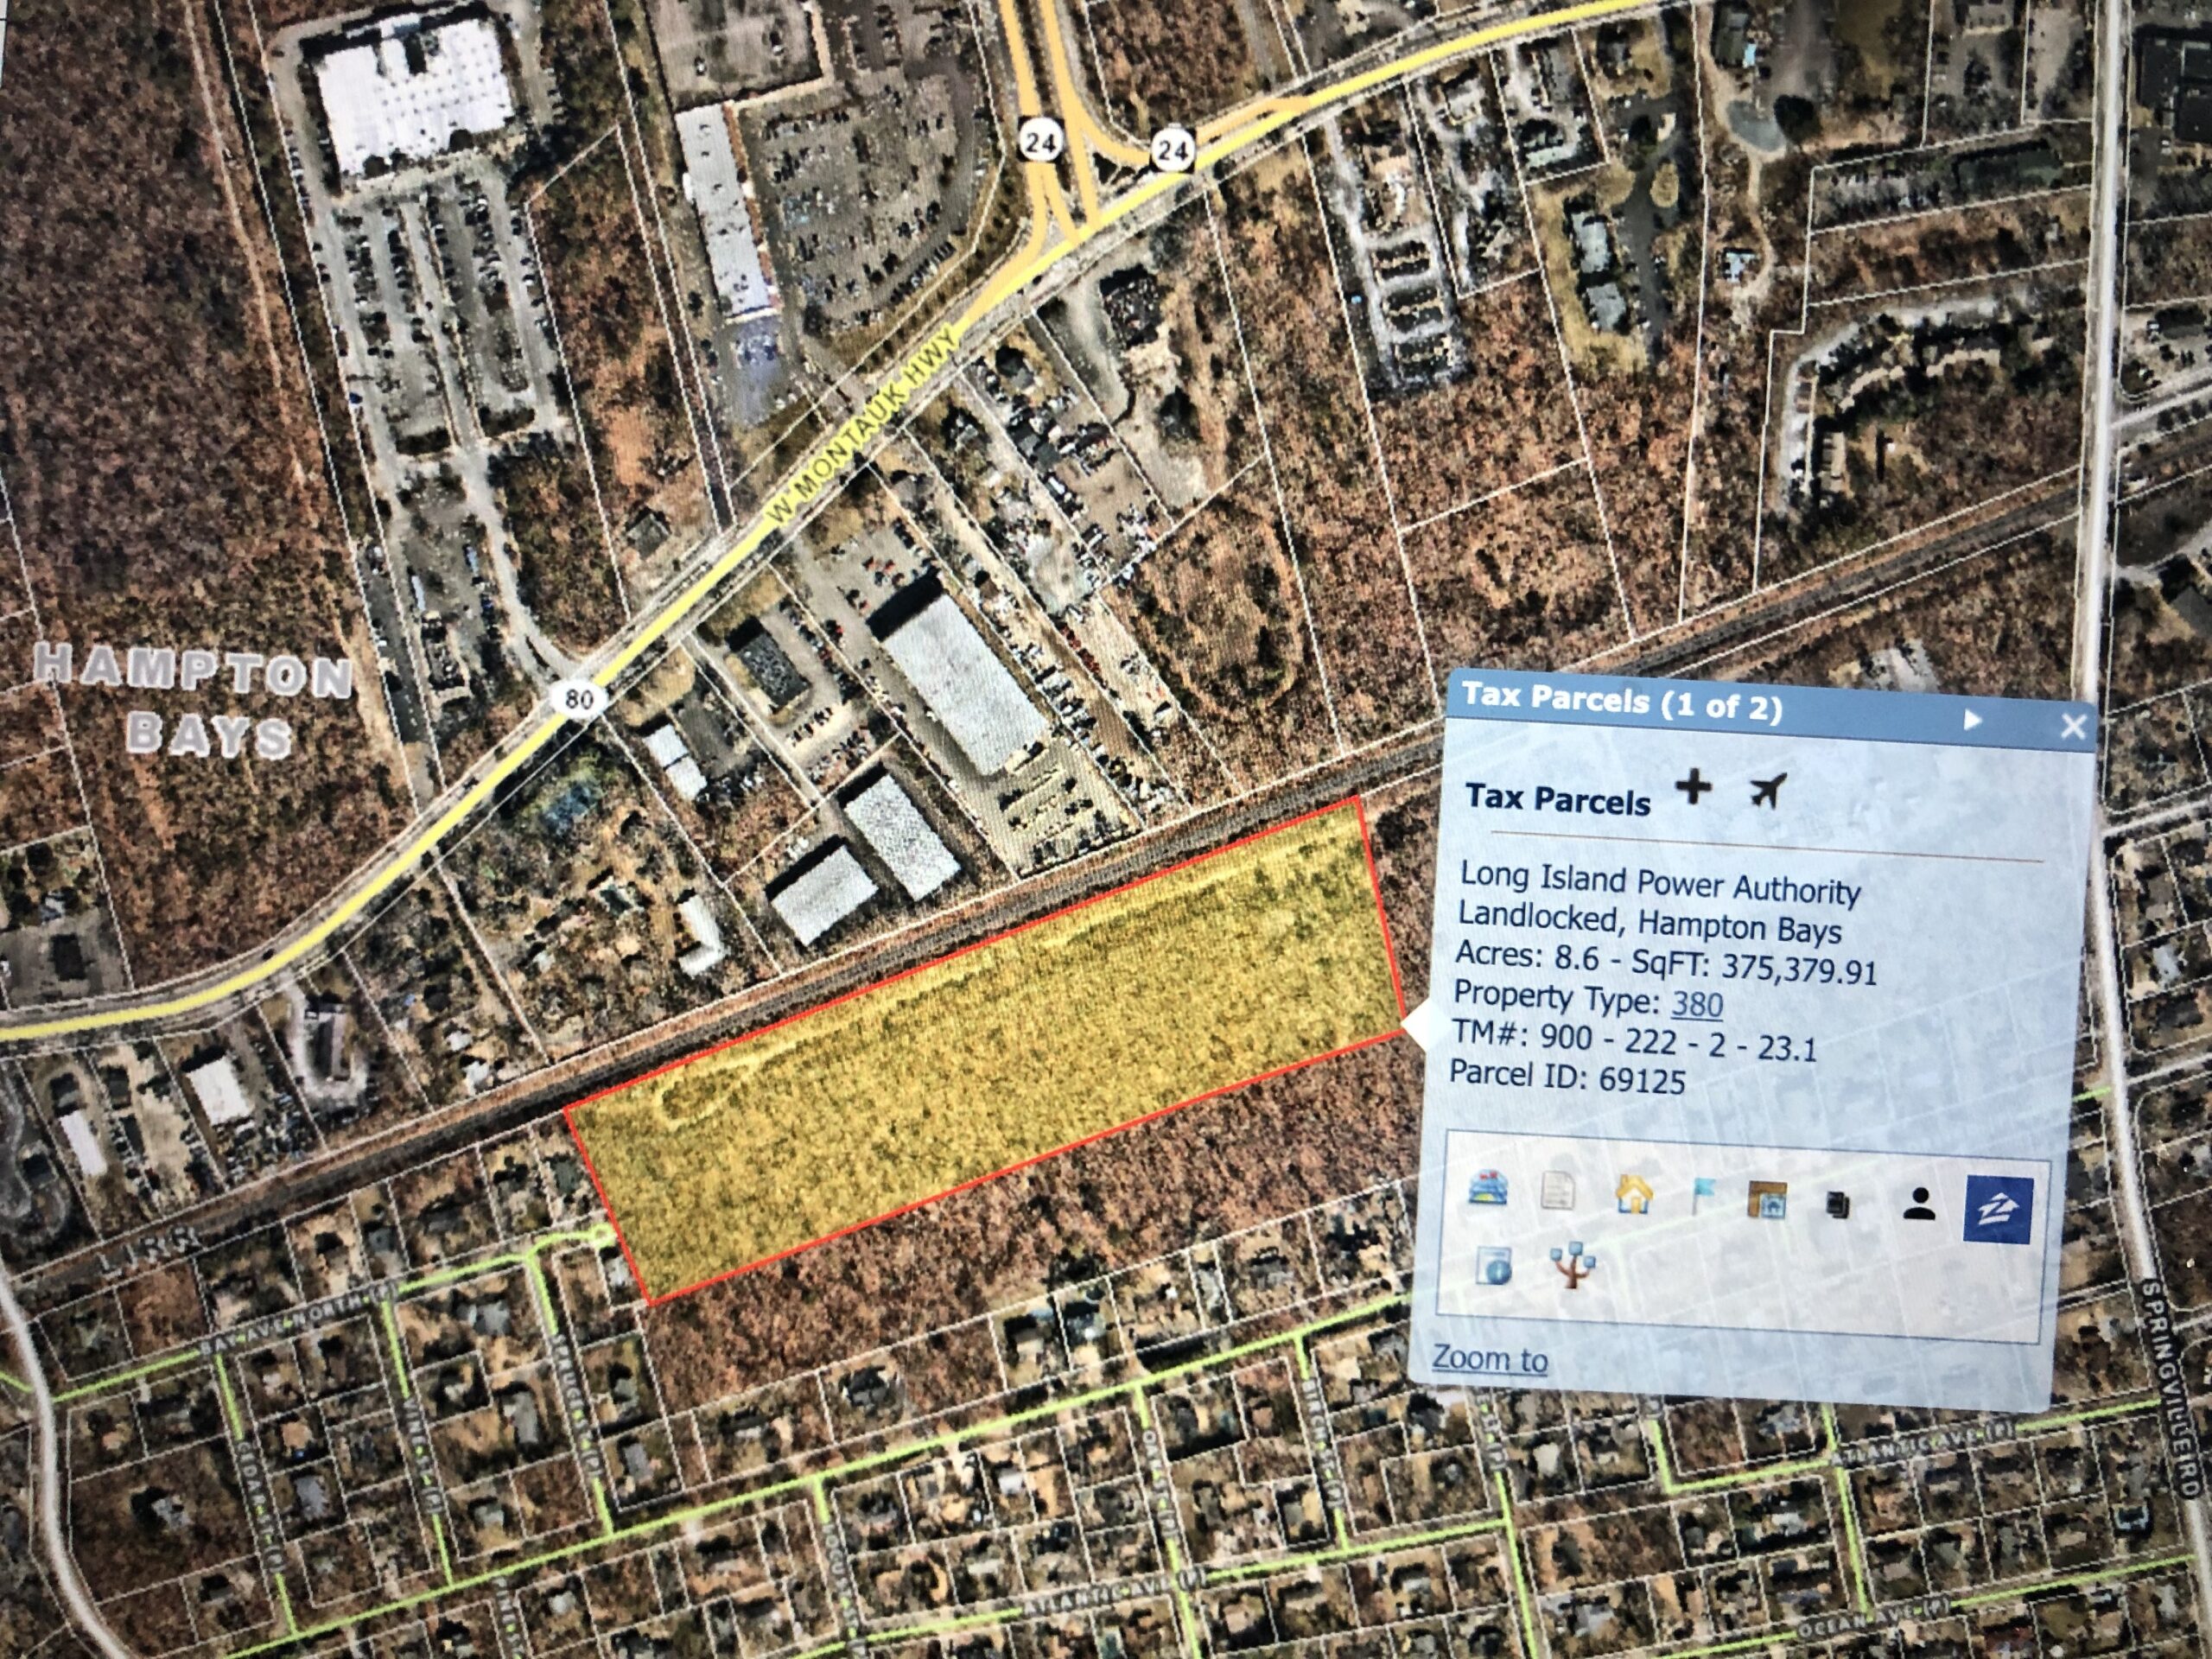 Supervisor Jay Schneiderman sent a screenshot of a potential site, colored in yellow, of a sewage treatment plant  to service downtown Hampton Bays.